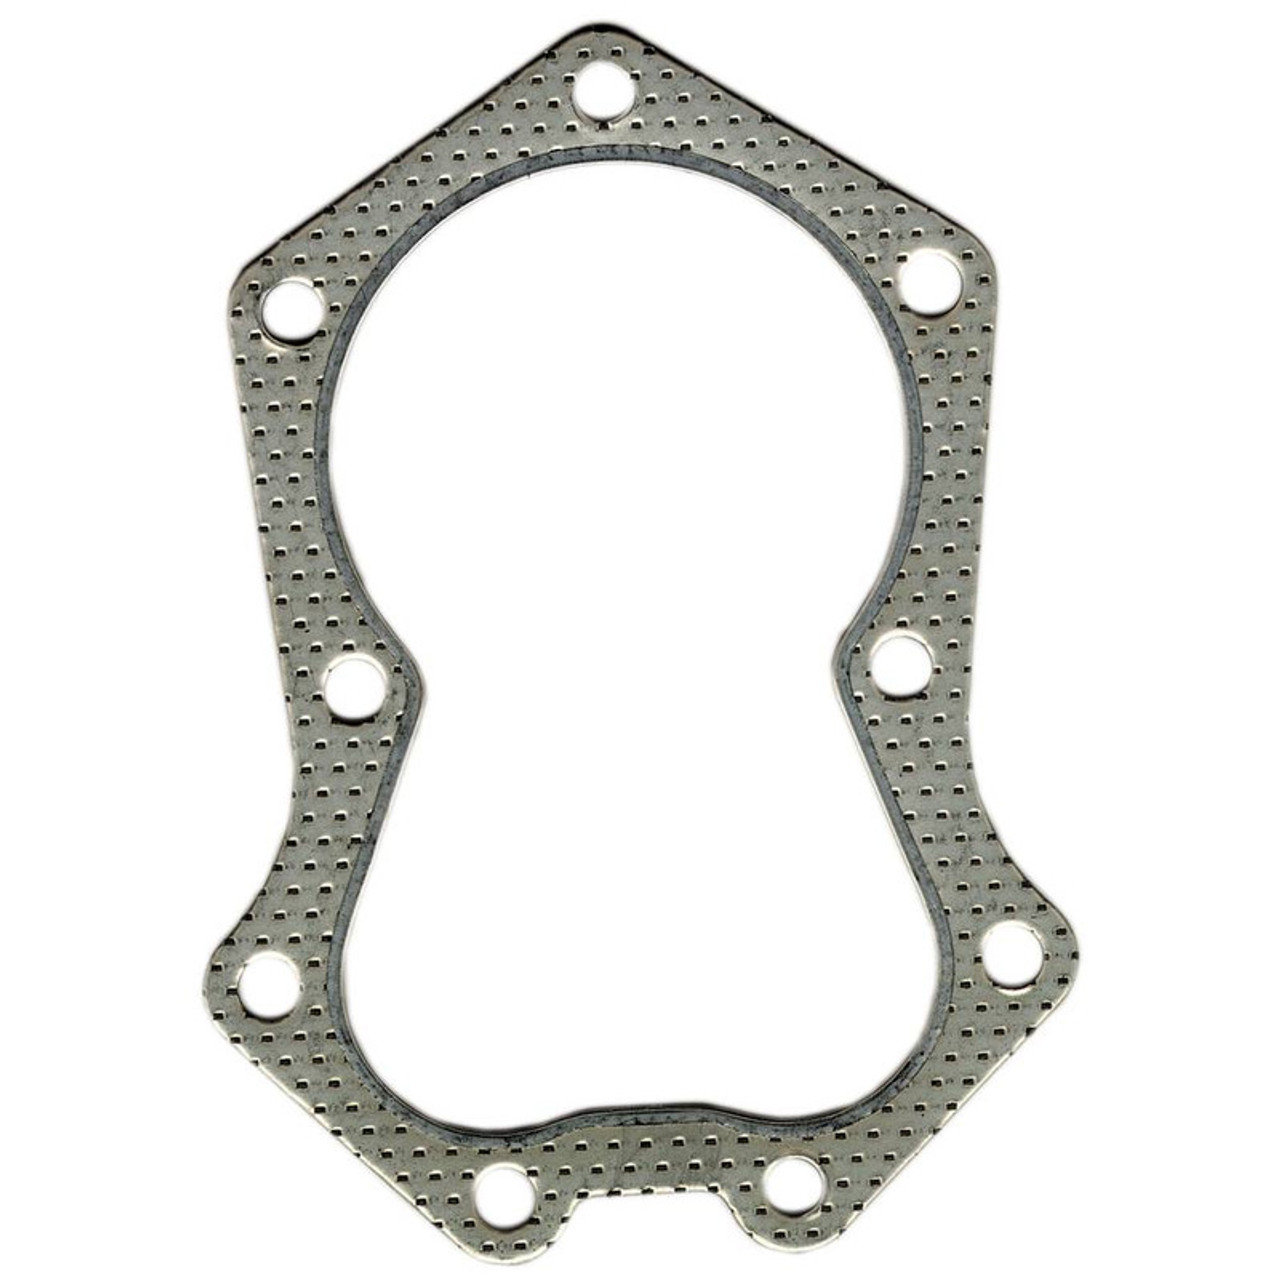 Head Gasket for Gravely 049449, 050449, 20942900, 20978400